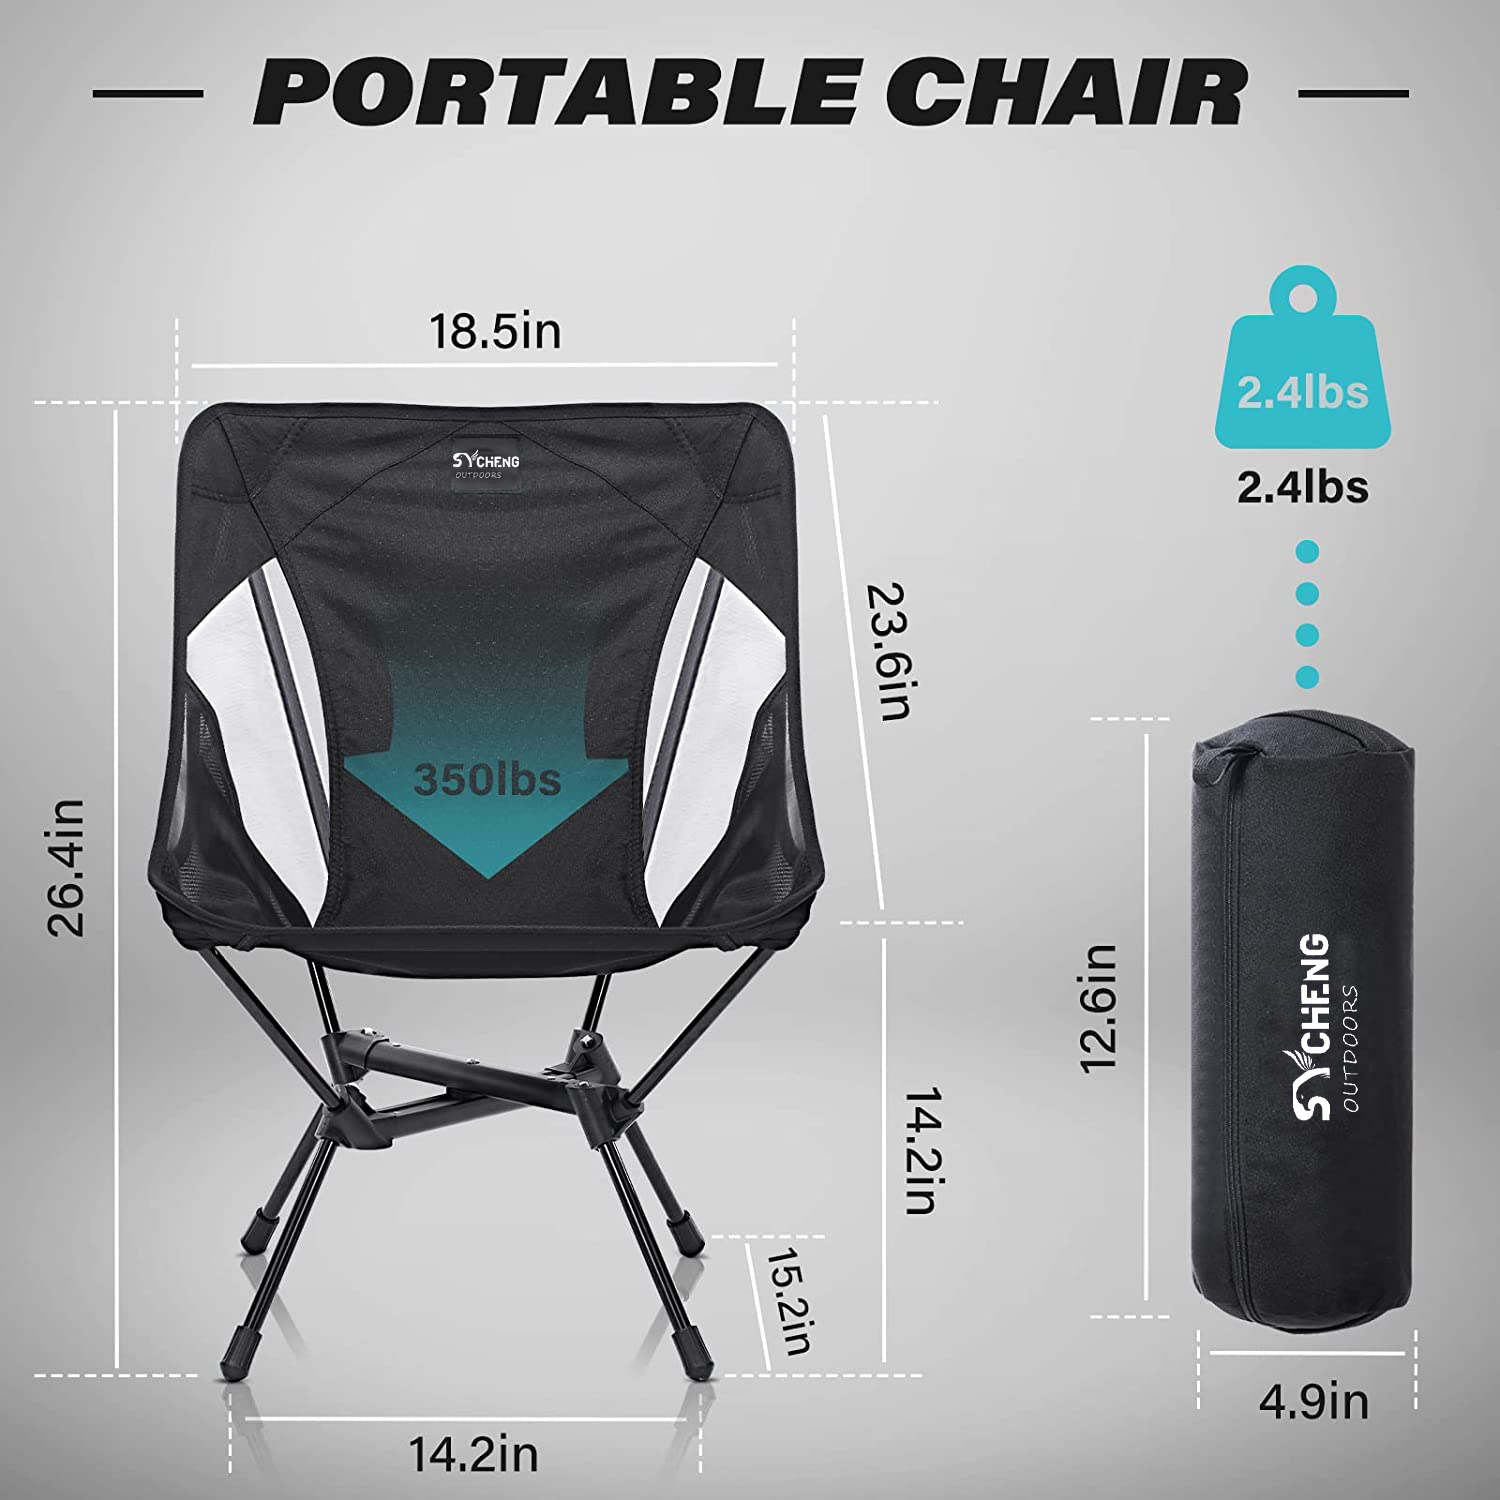 SYCHENG New Portable Camping Chairs with Side Pockets Adjustable Height Foldable Chairs for Backpacking Hiking Beach Camping